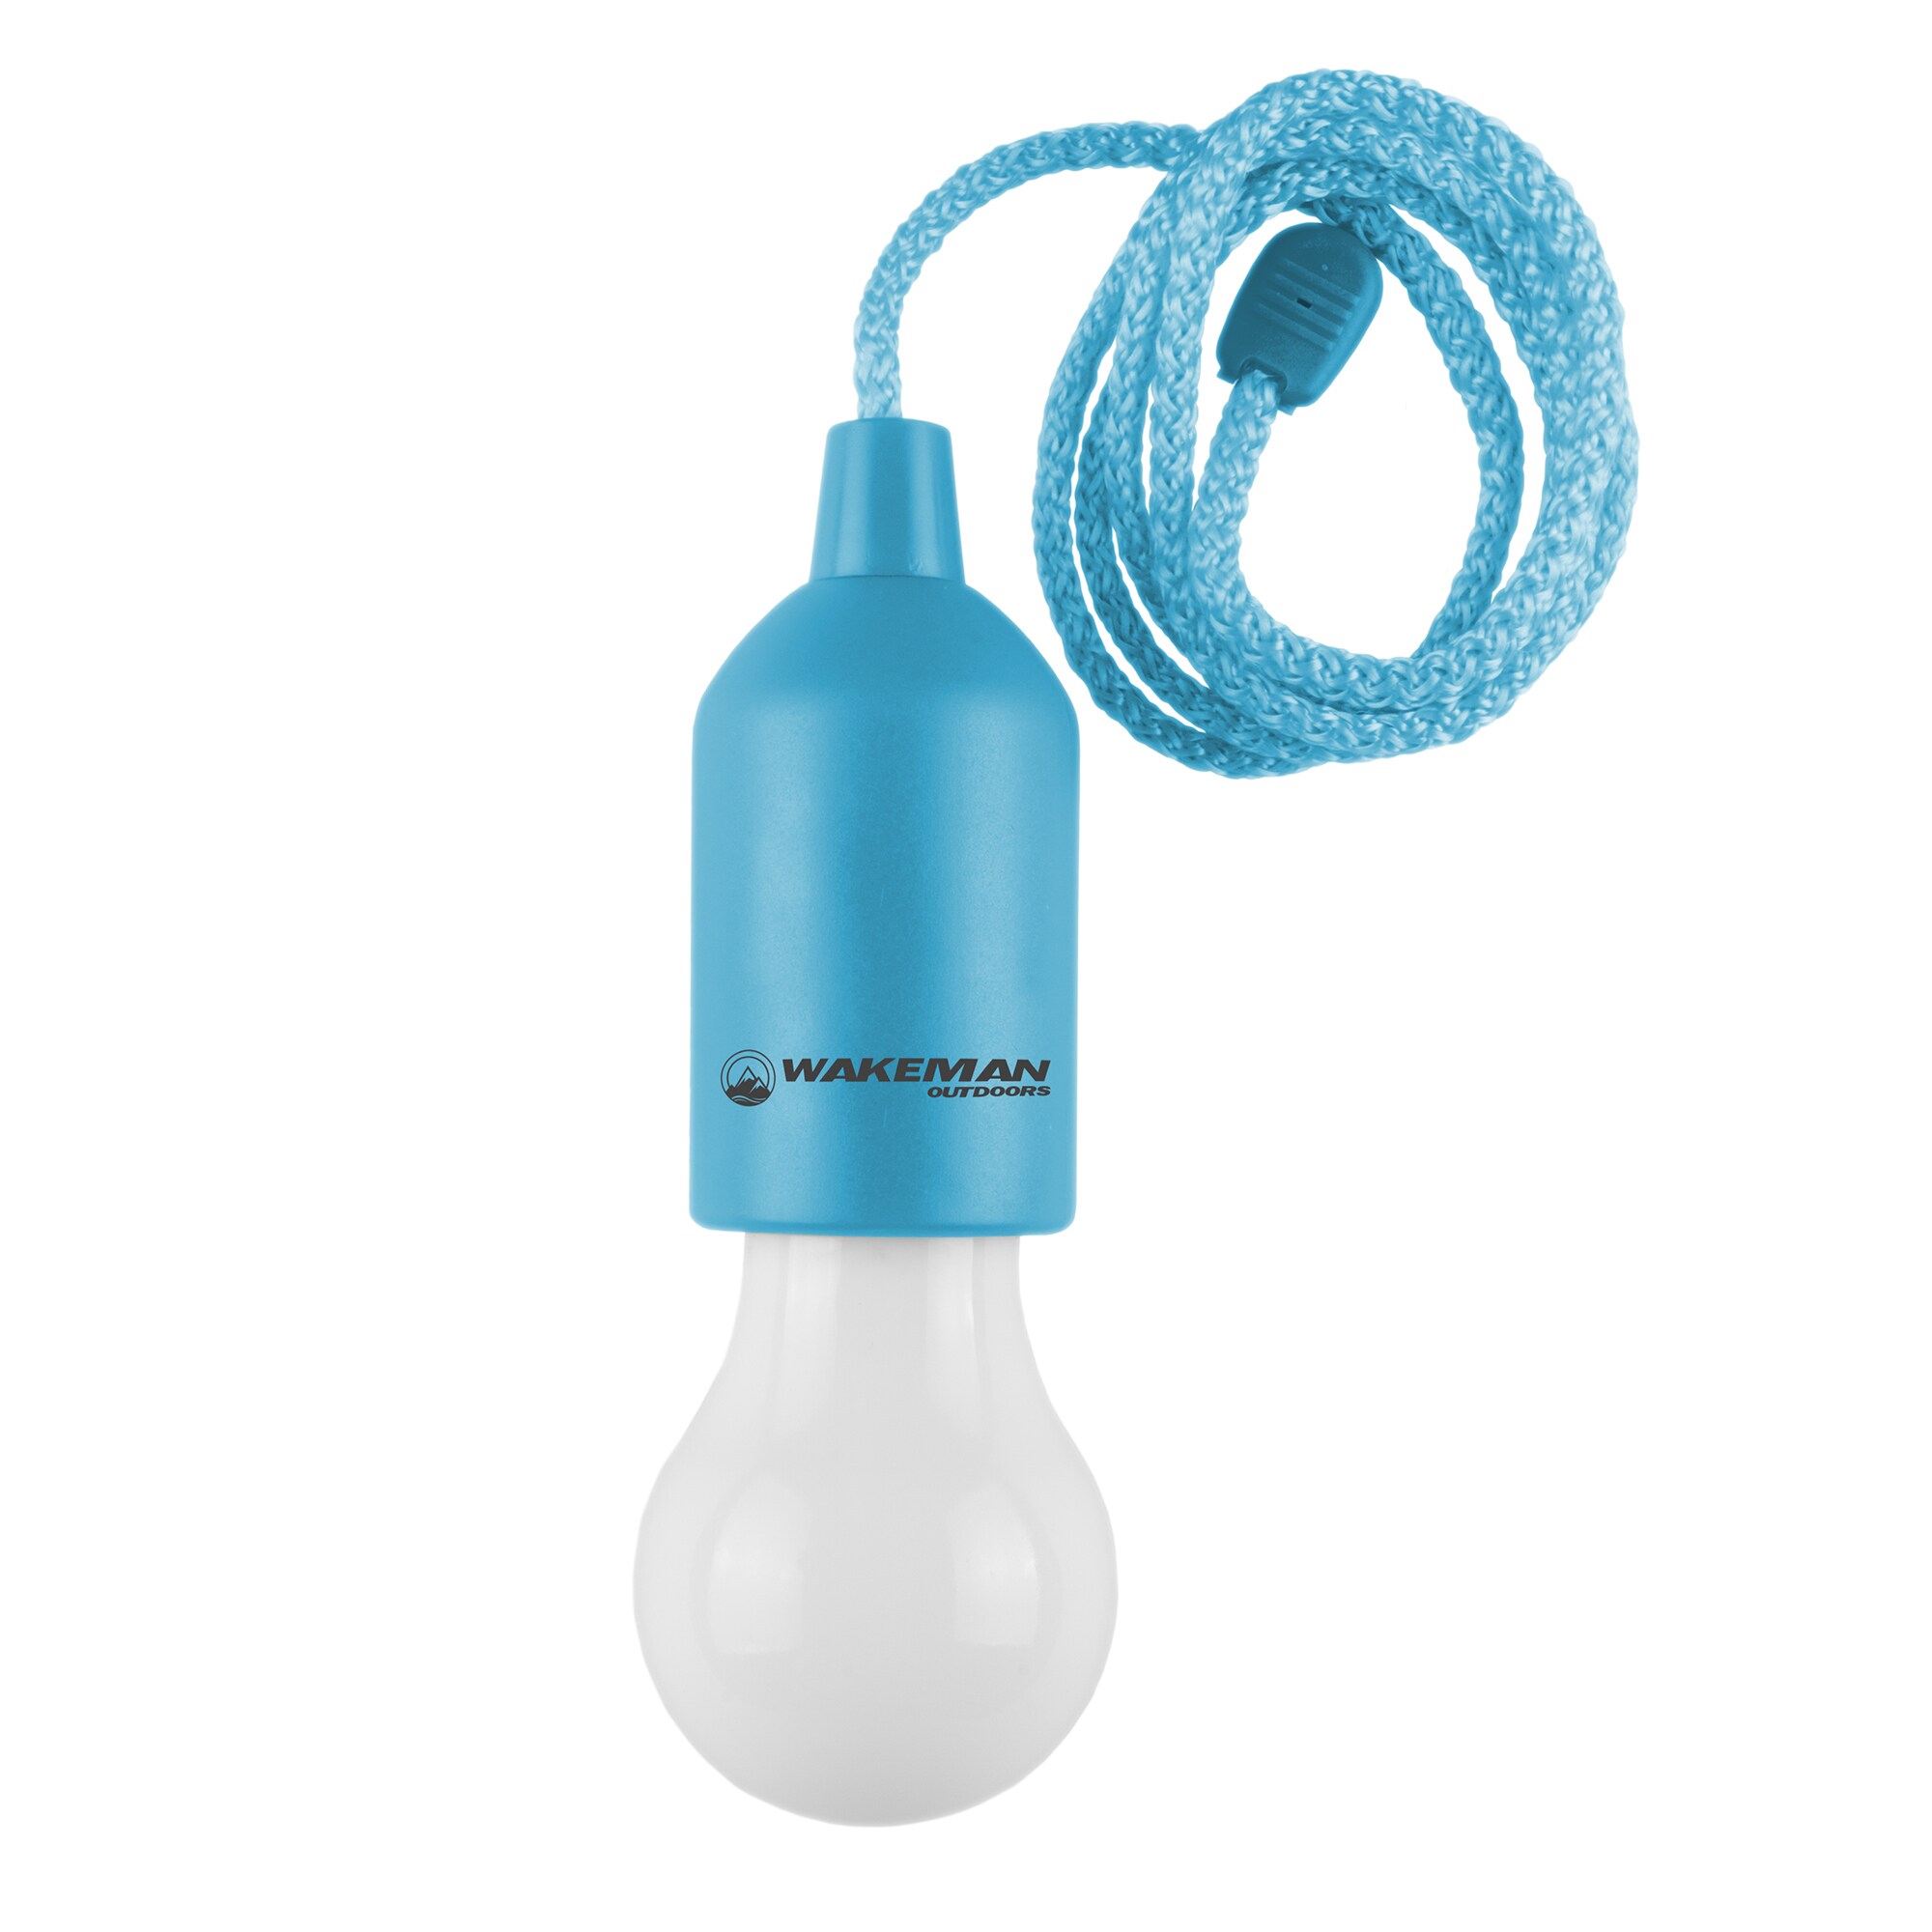 Out of the Blue Universal Hanging Camping Lamp 